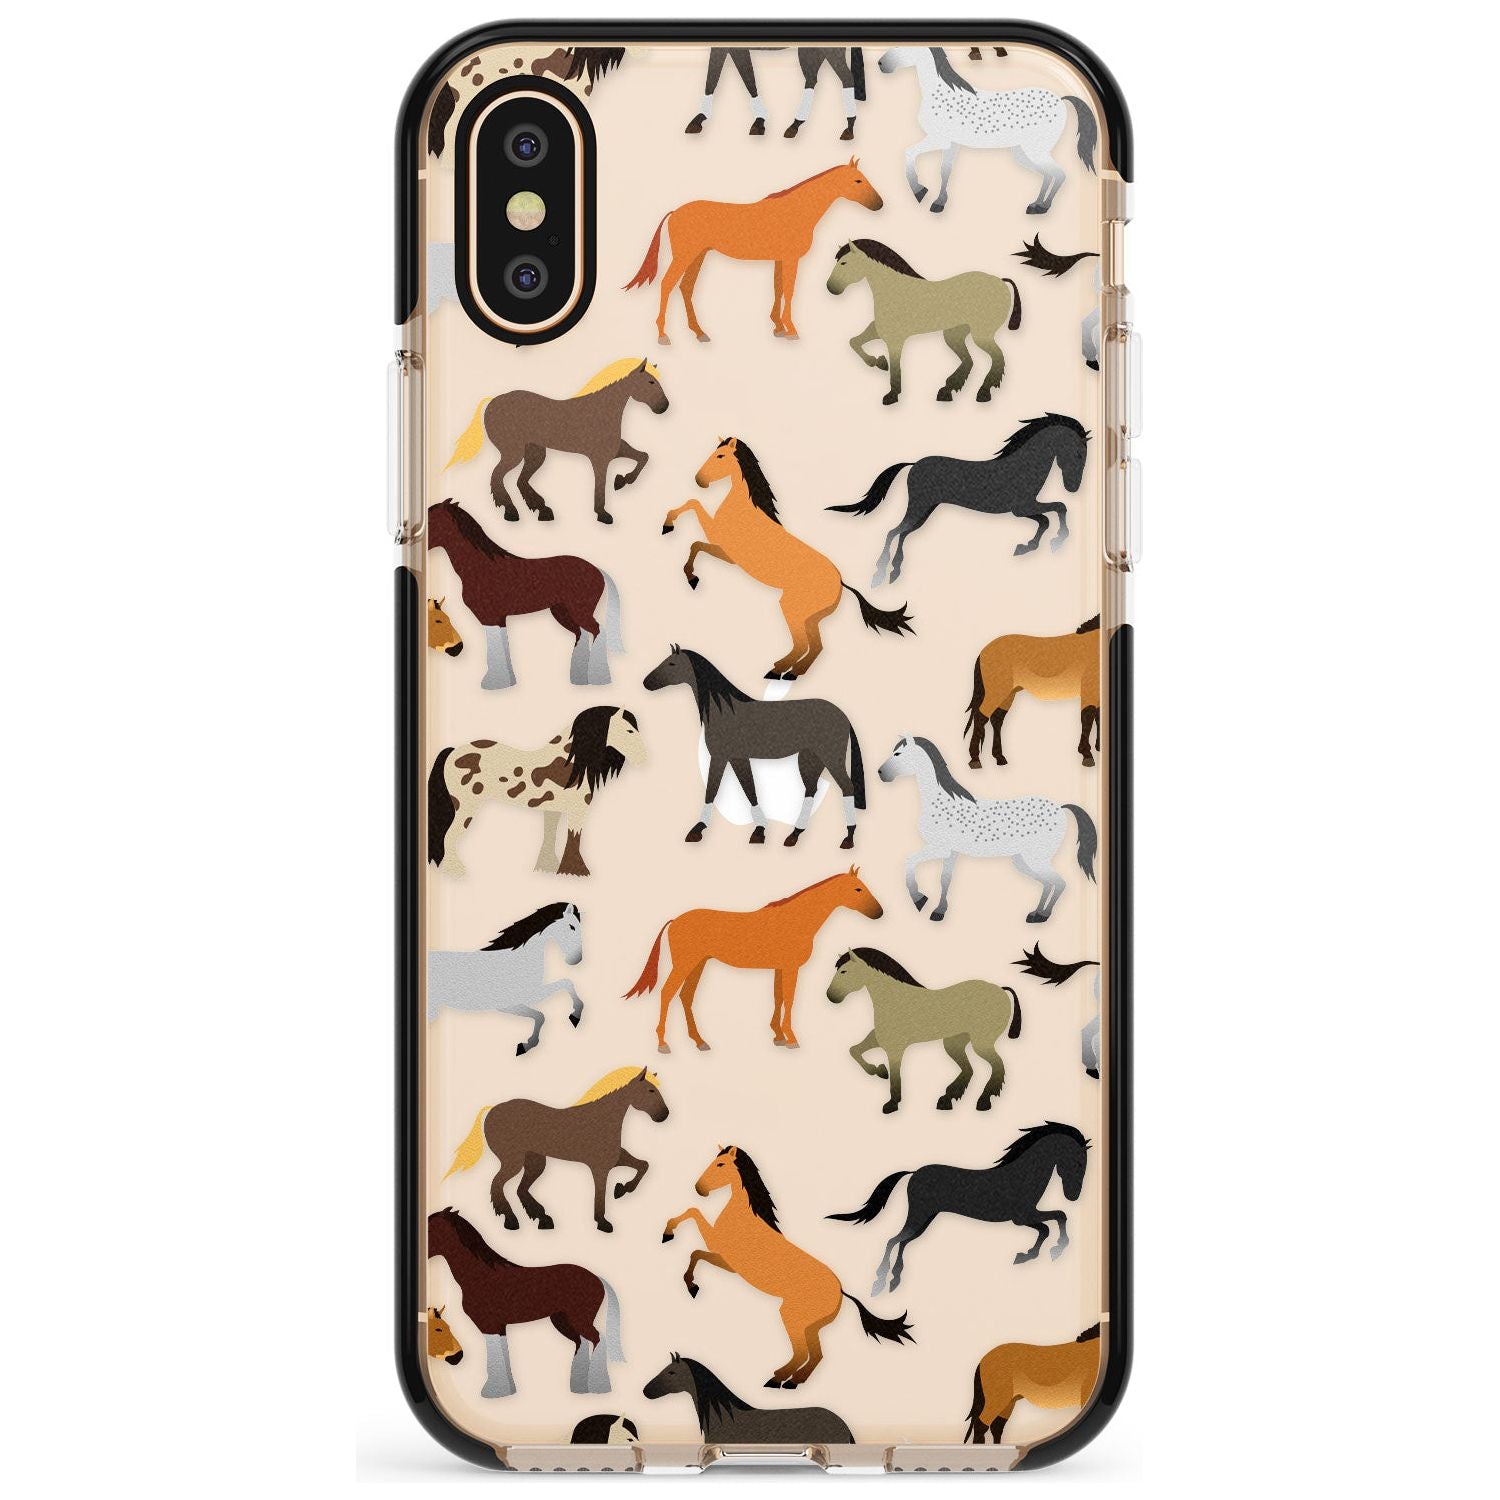 Horse Pattern Black Impact Phone Case for iPhone X XS Max XR